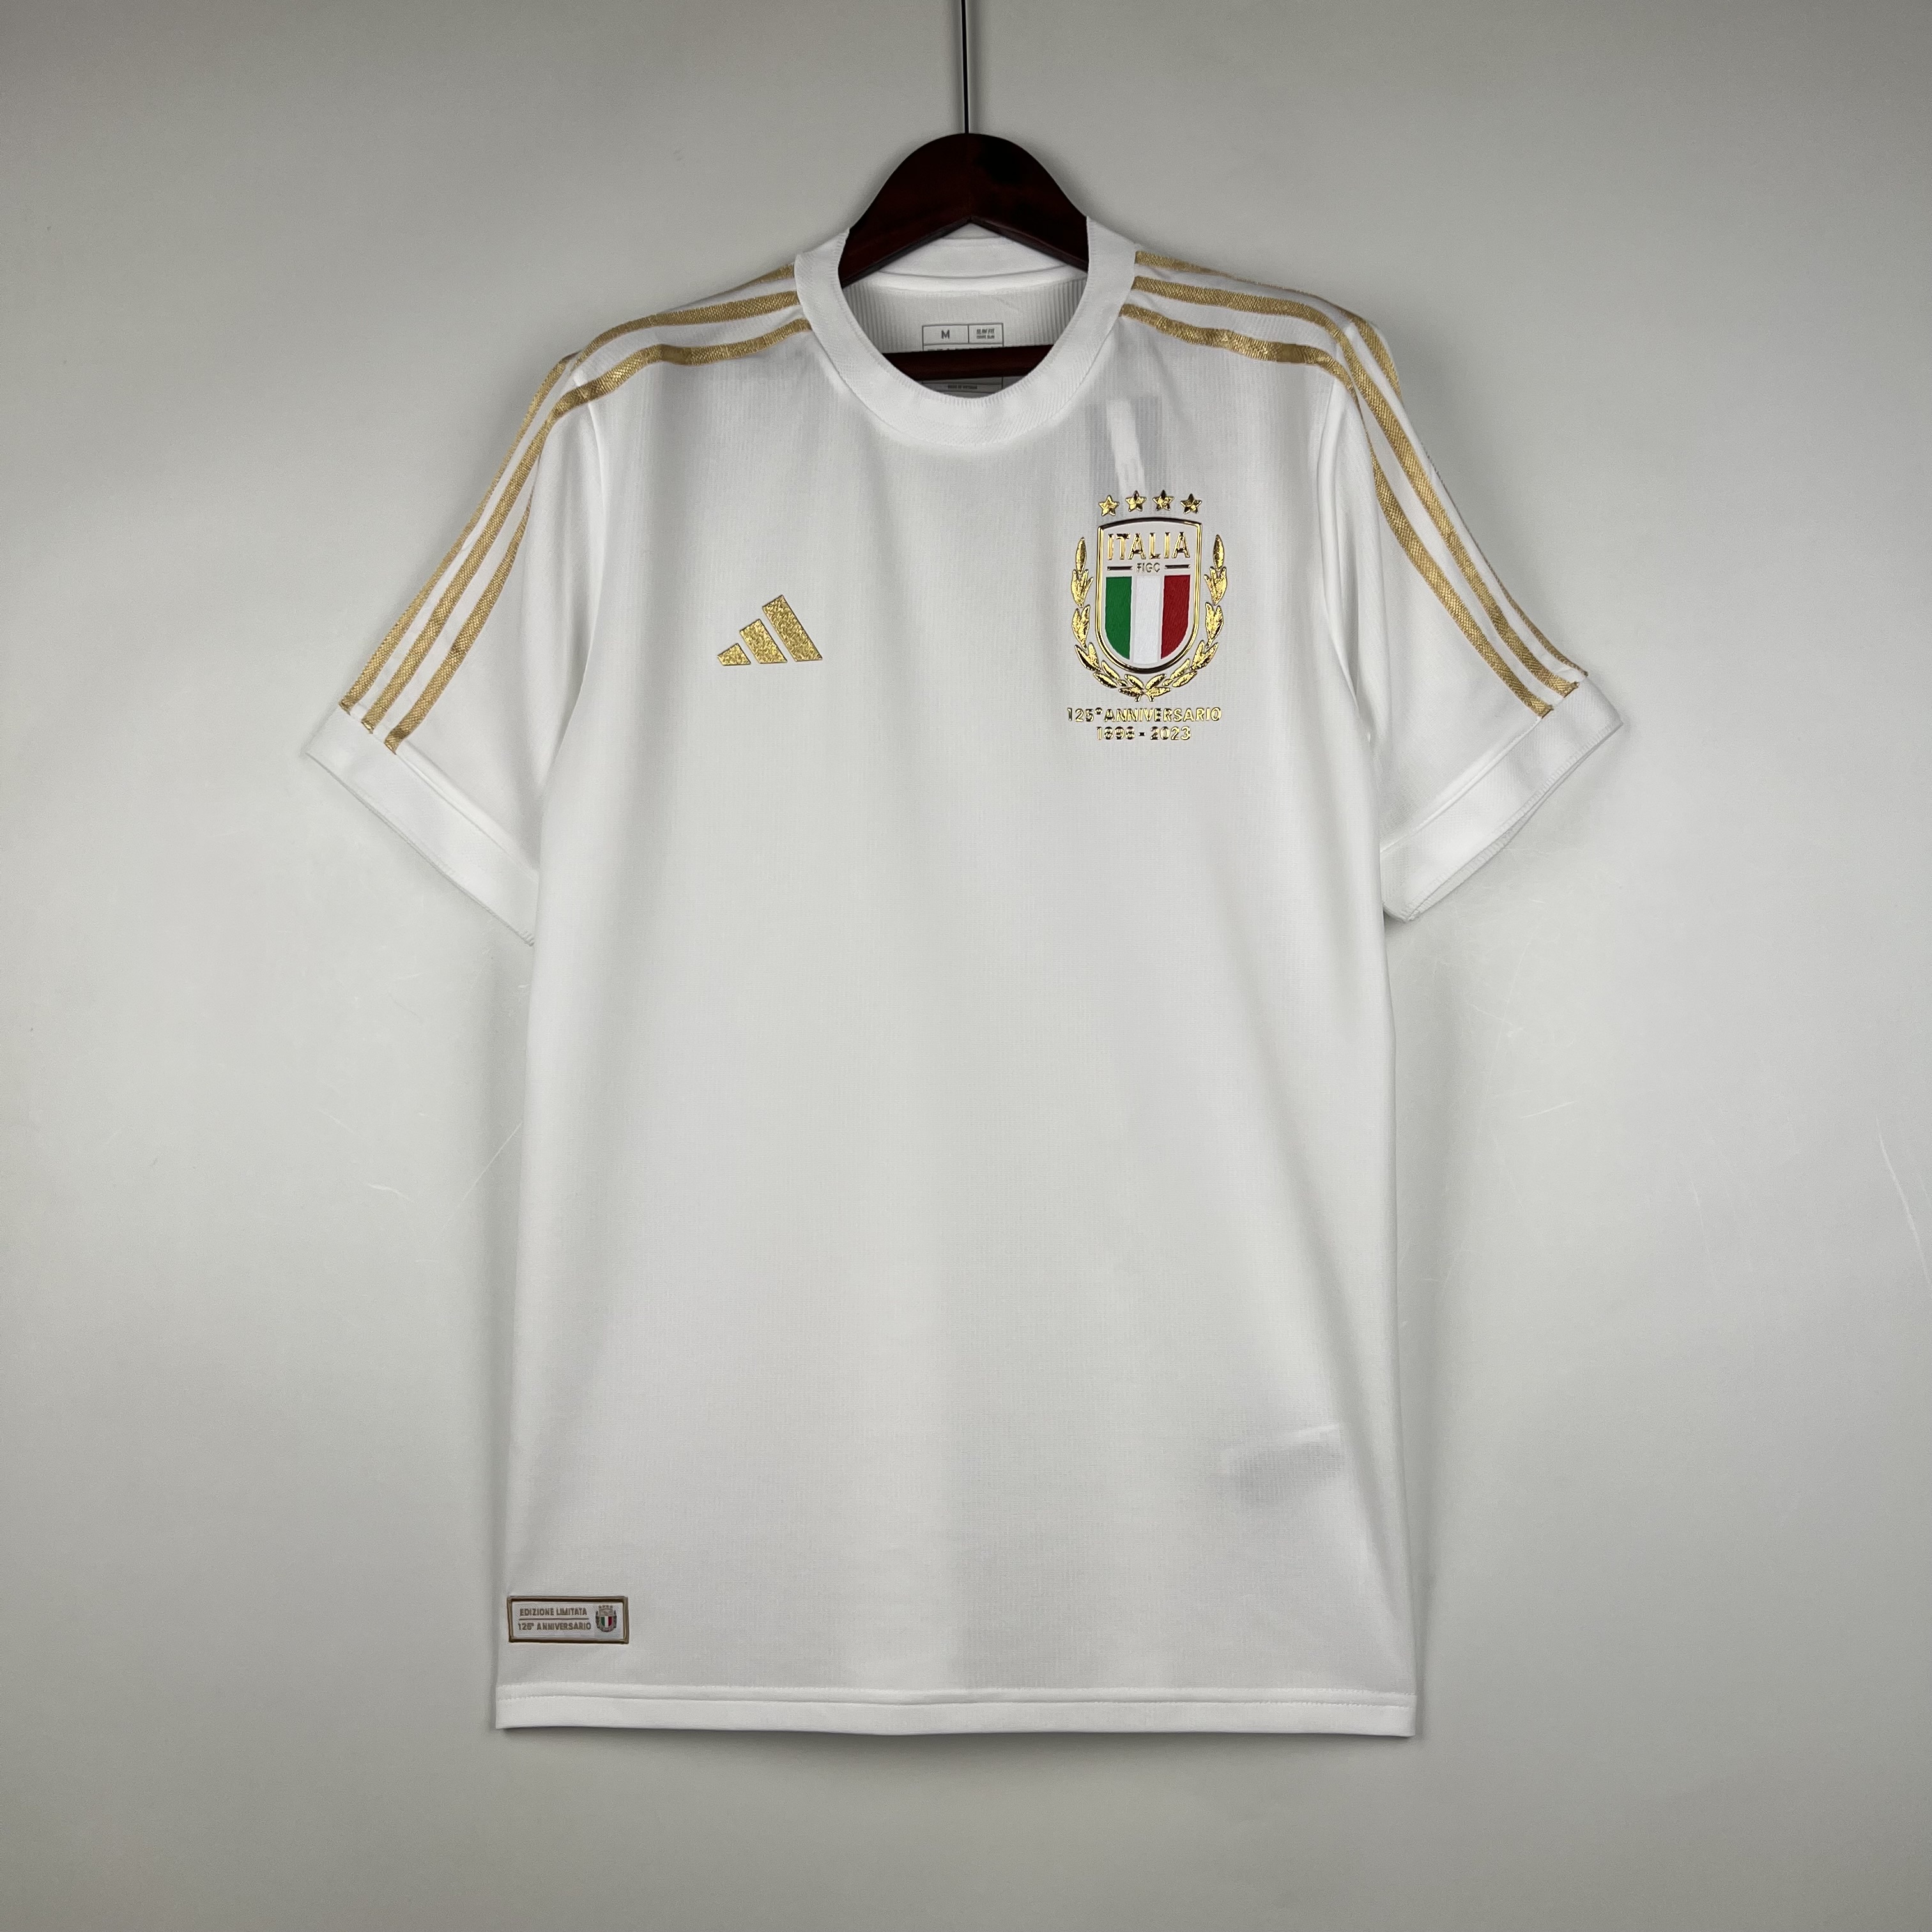 23-24 Italy 125th Anniversary Edition Size S-4XL